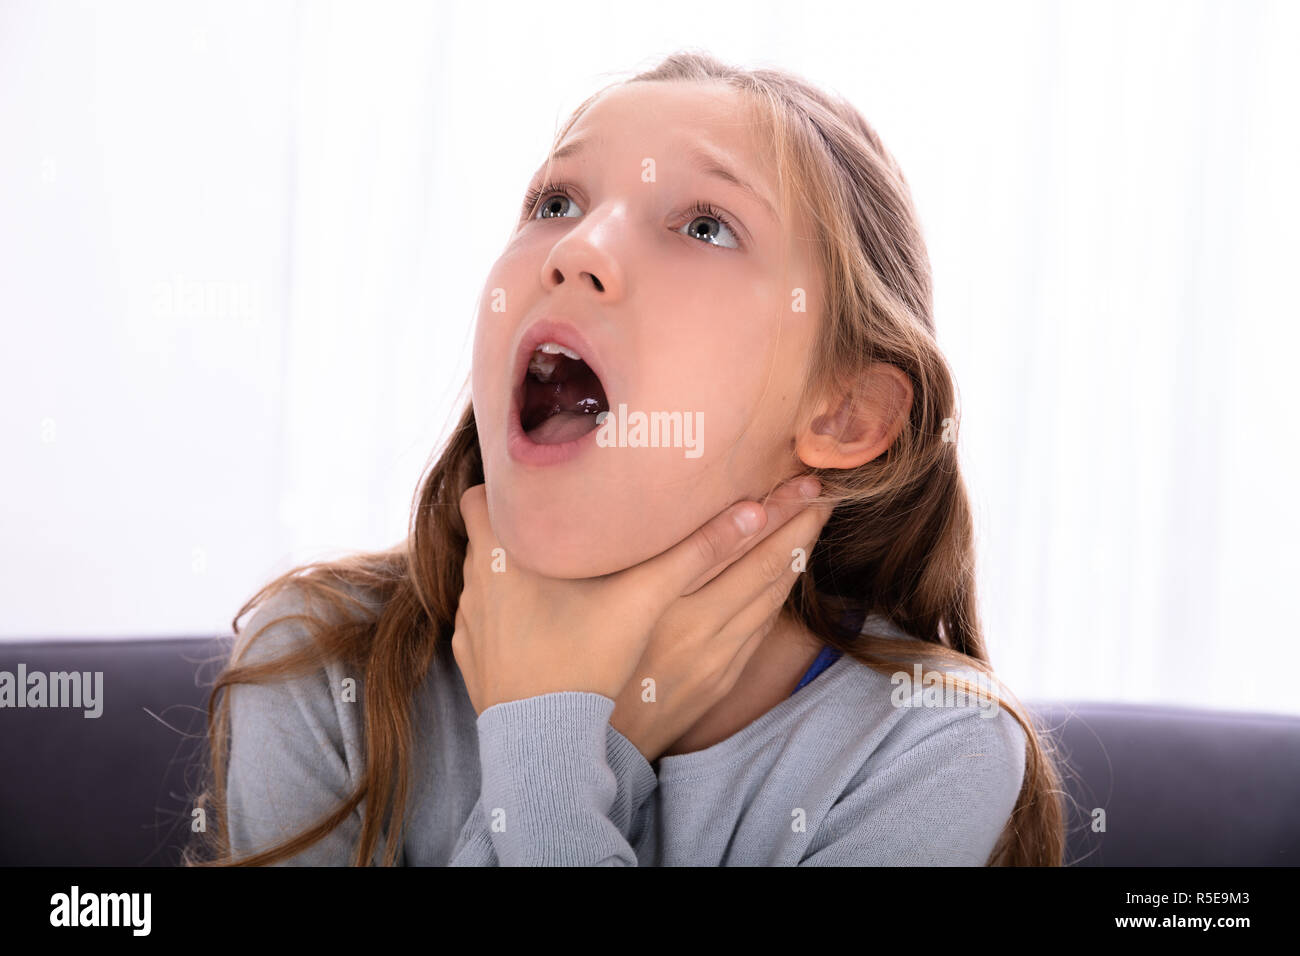 Portrait Of A Girl Unable To Breathe Pressing Her Neck Stock Photo